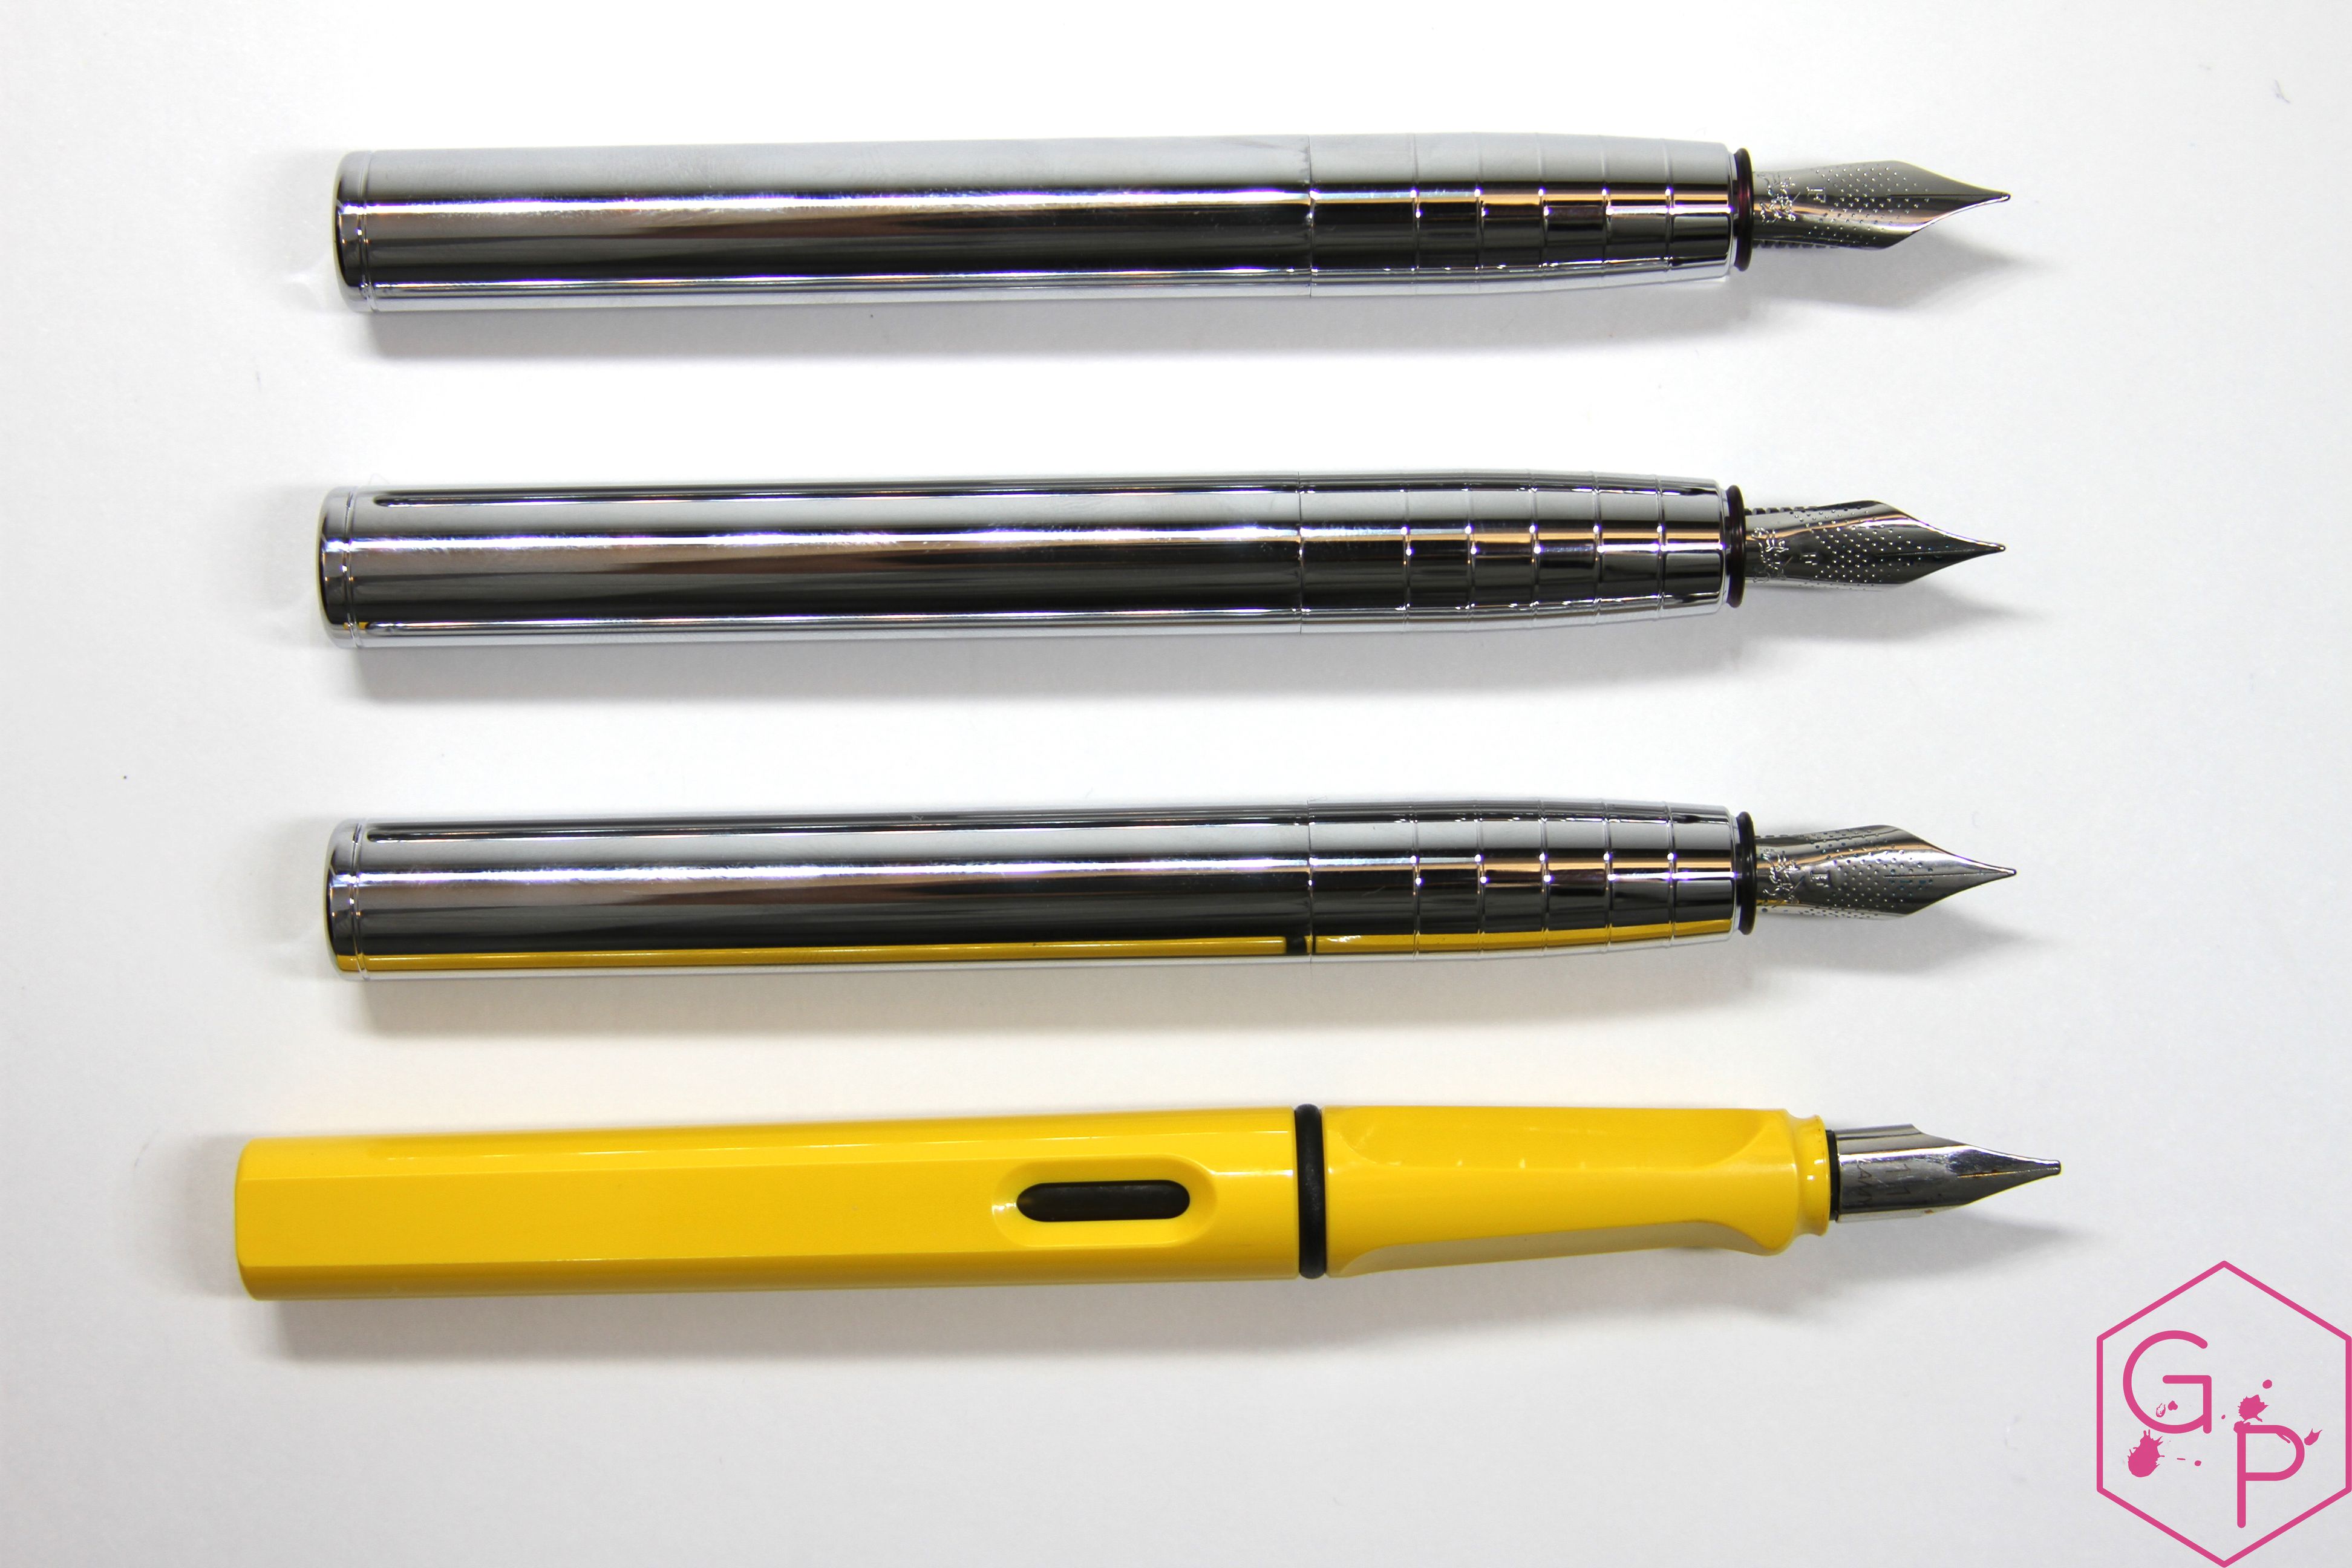 A look at the Faber-Castell Loom fountain pen.